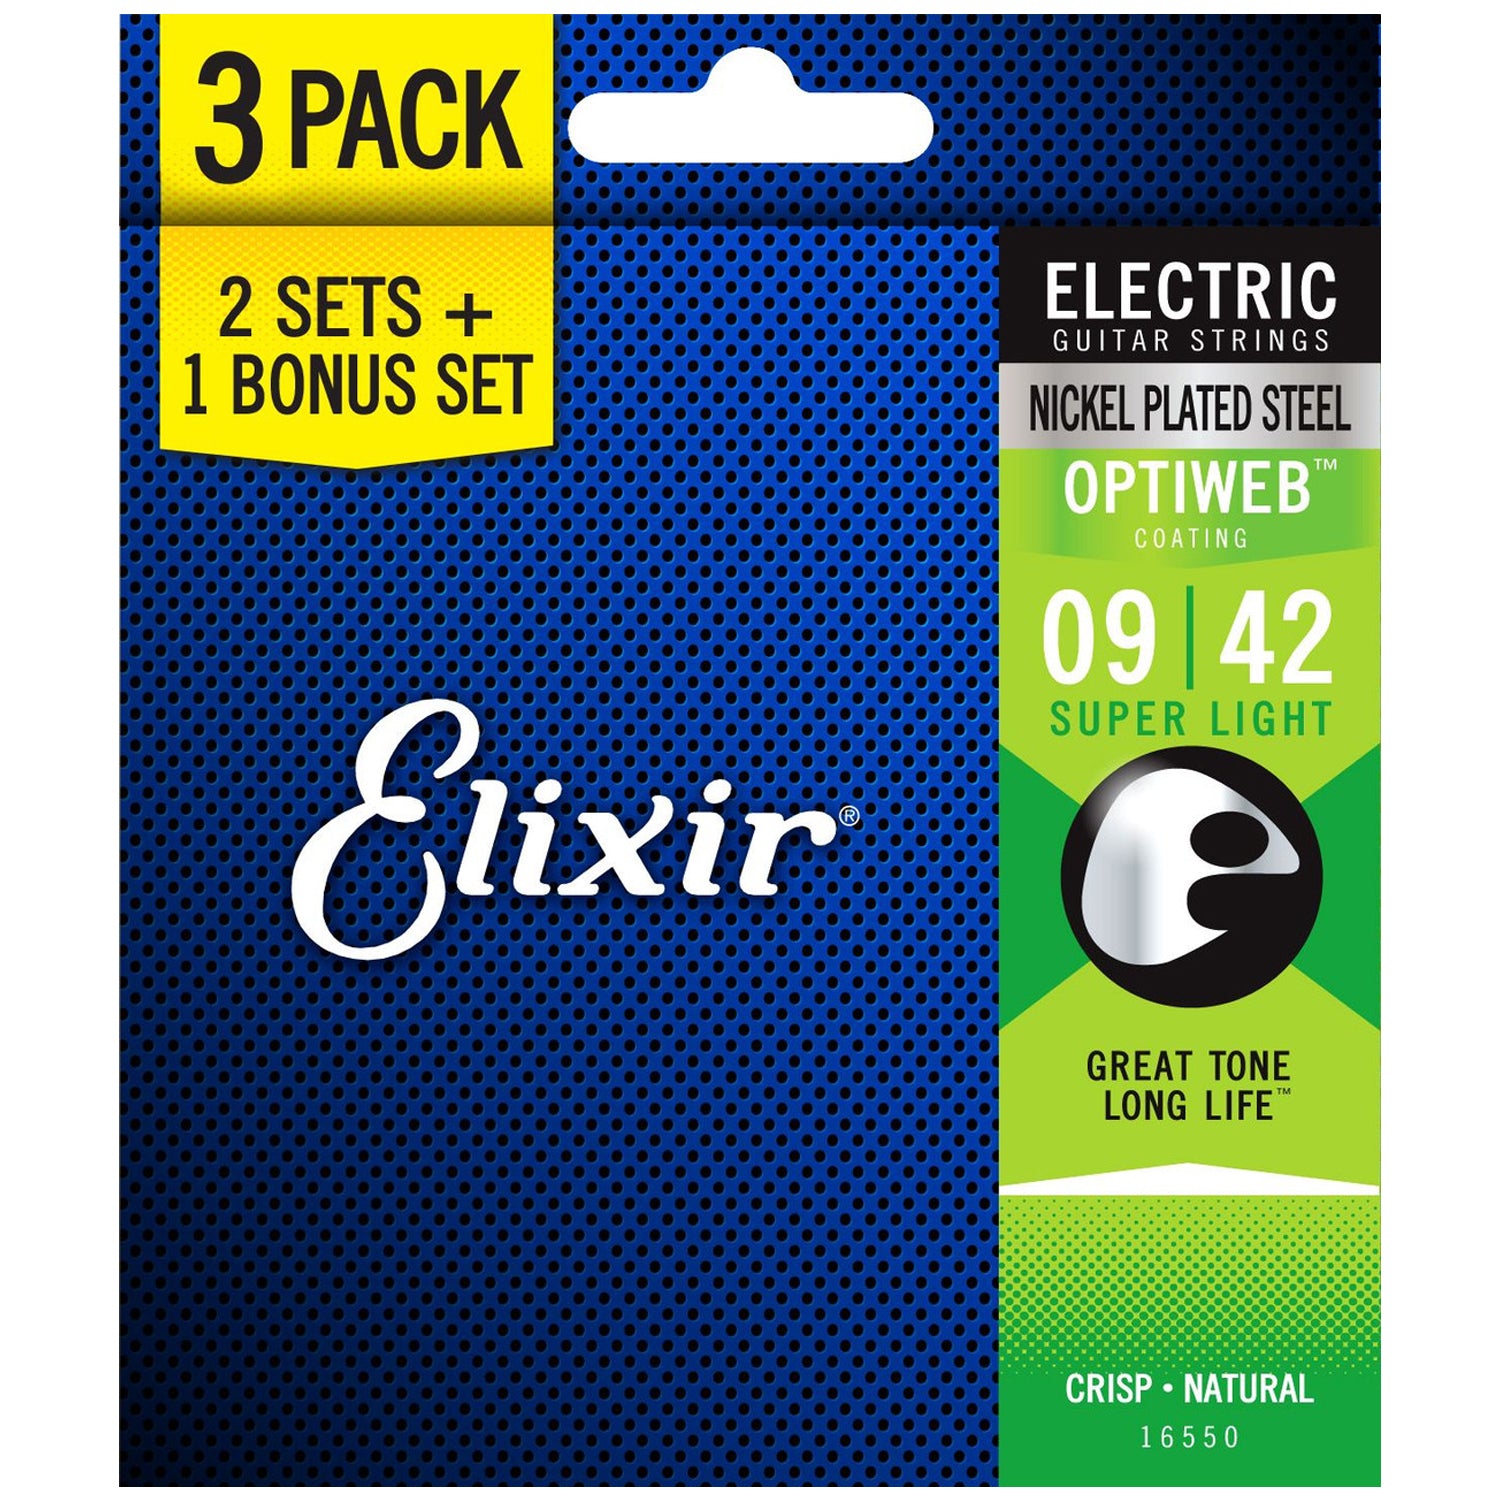 Guitar　(9　Optiweb　with　Strings　24　16　Super　Nickel　Light　11　3-Pack　32　Steel　Plated　Electric　Coating　42)　Elixir　Electric